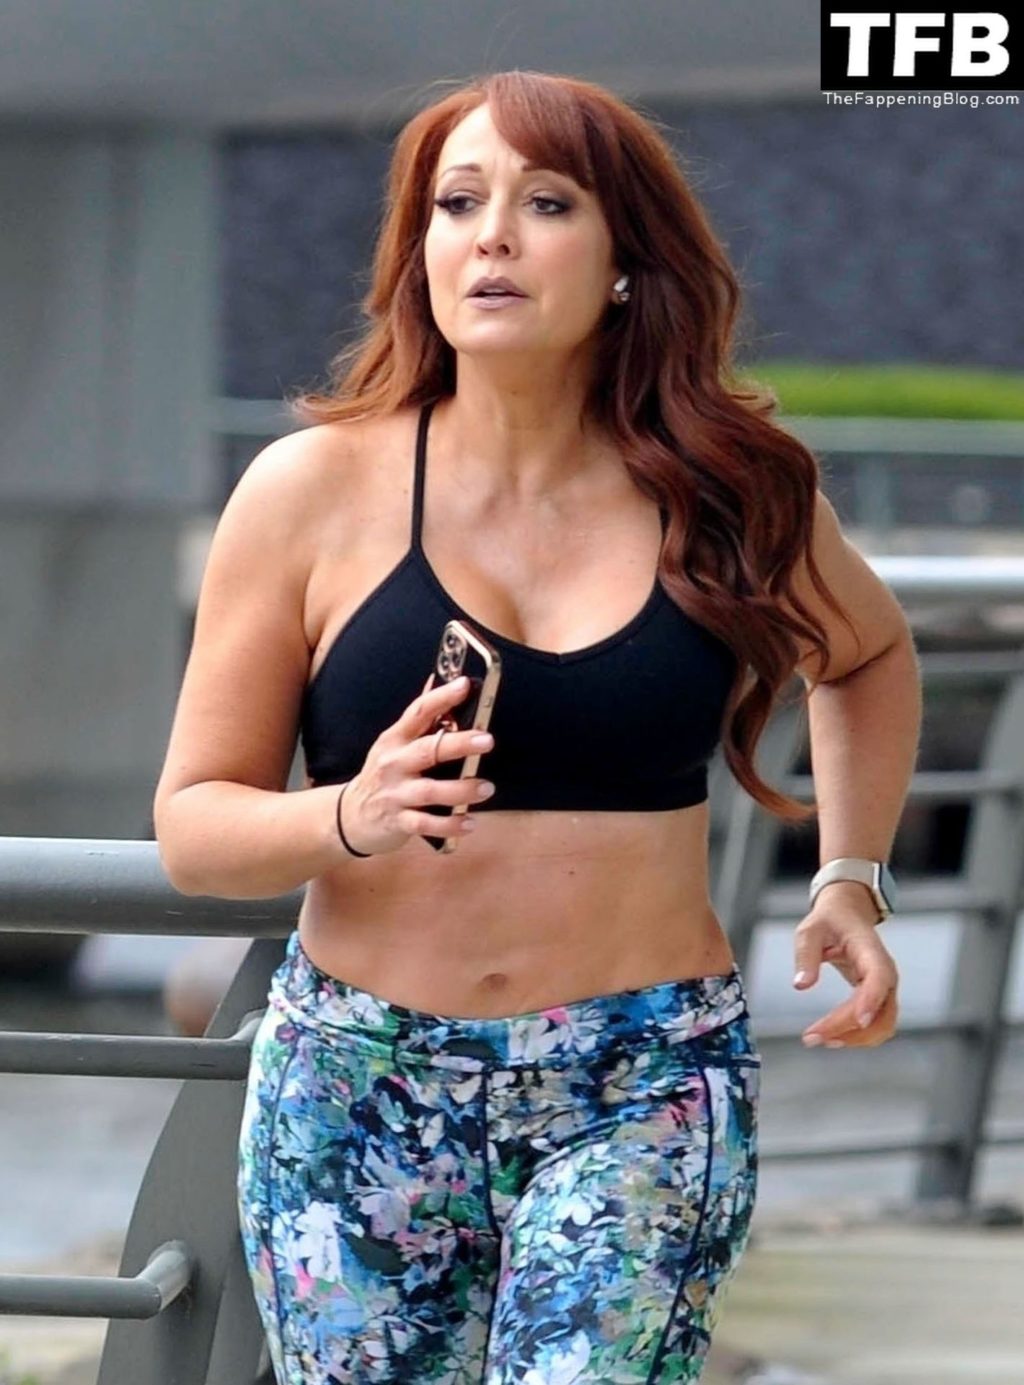 Amy Anzel Sexy The Fappening Blog 2 1024x1385 - Amy Anzel Puts on a Busty Display Working Out at Media City in Manchester (13 Photos)